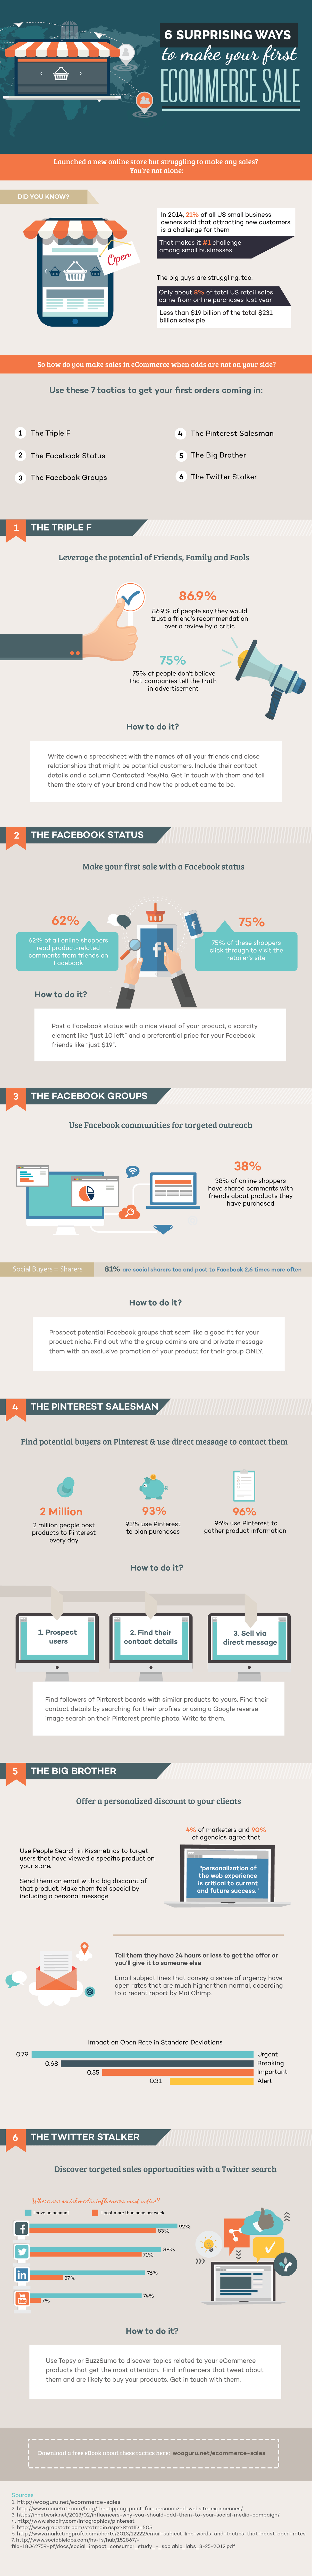 6-ways-to-make-your-first-ecommerce-sale-infographic